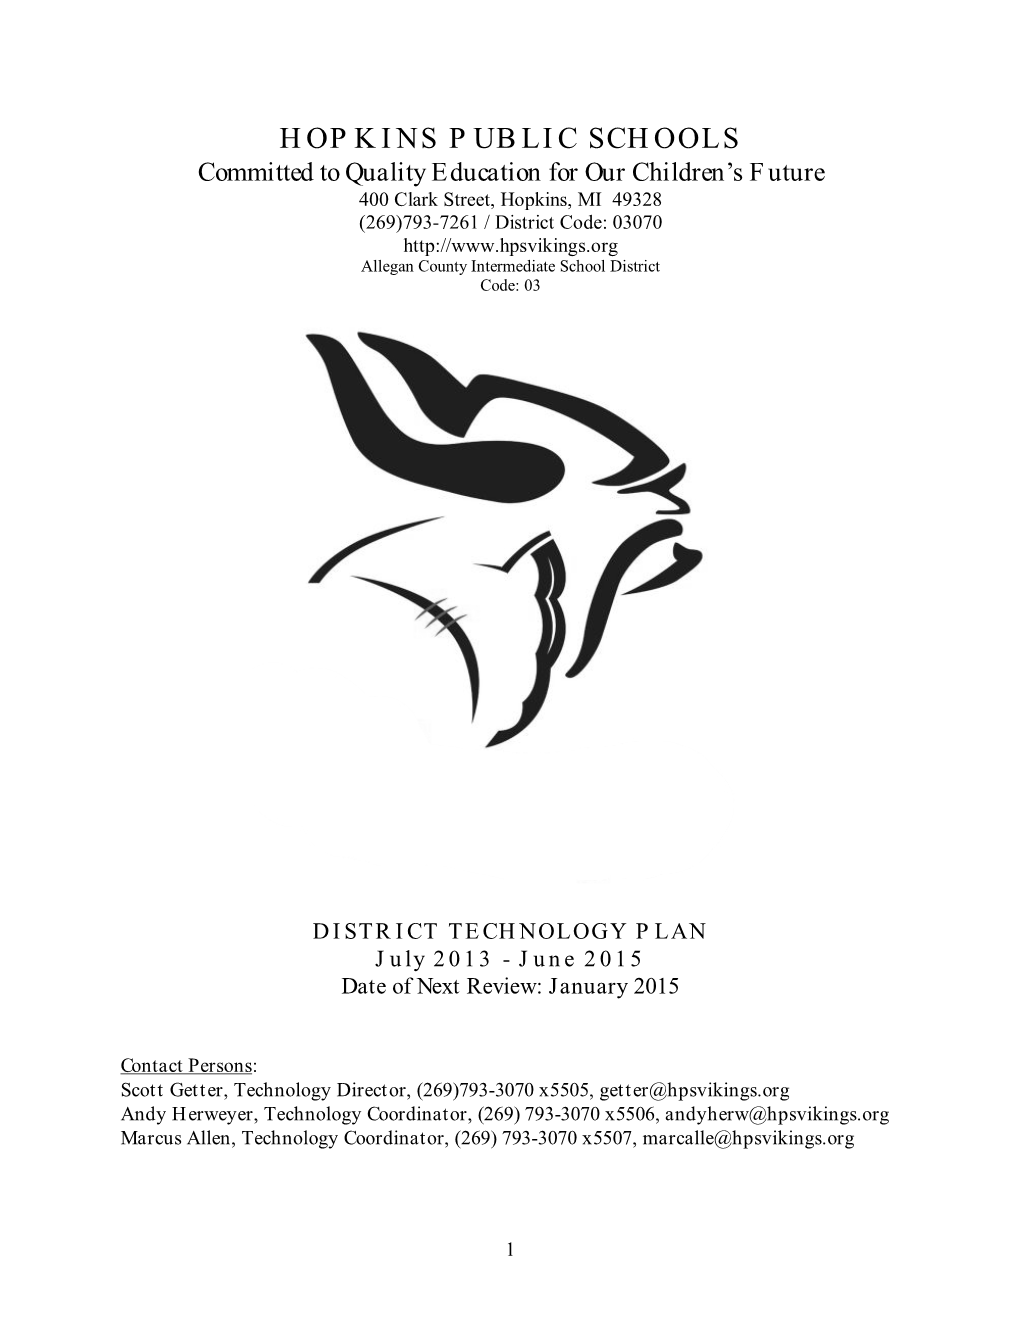 TECHNOLOGY PLAN July 2013 - June 2015 Date of Next Review: January 2015